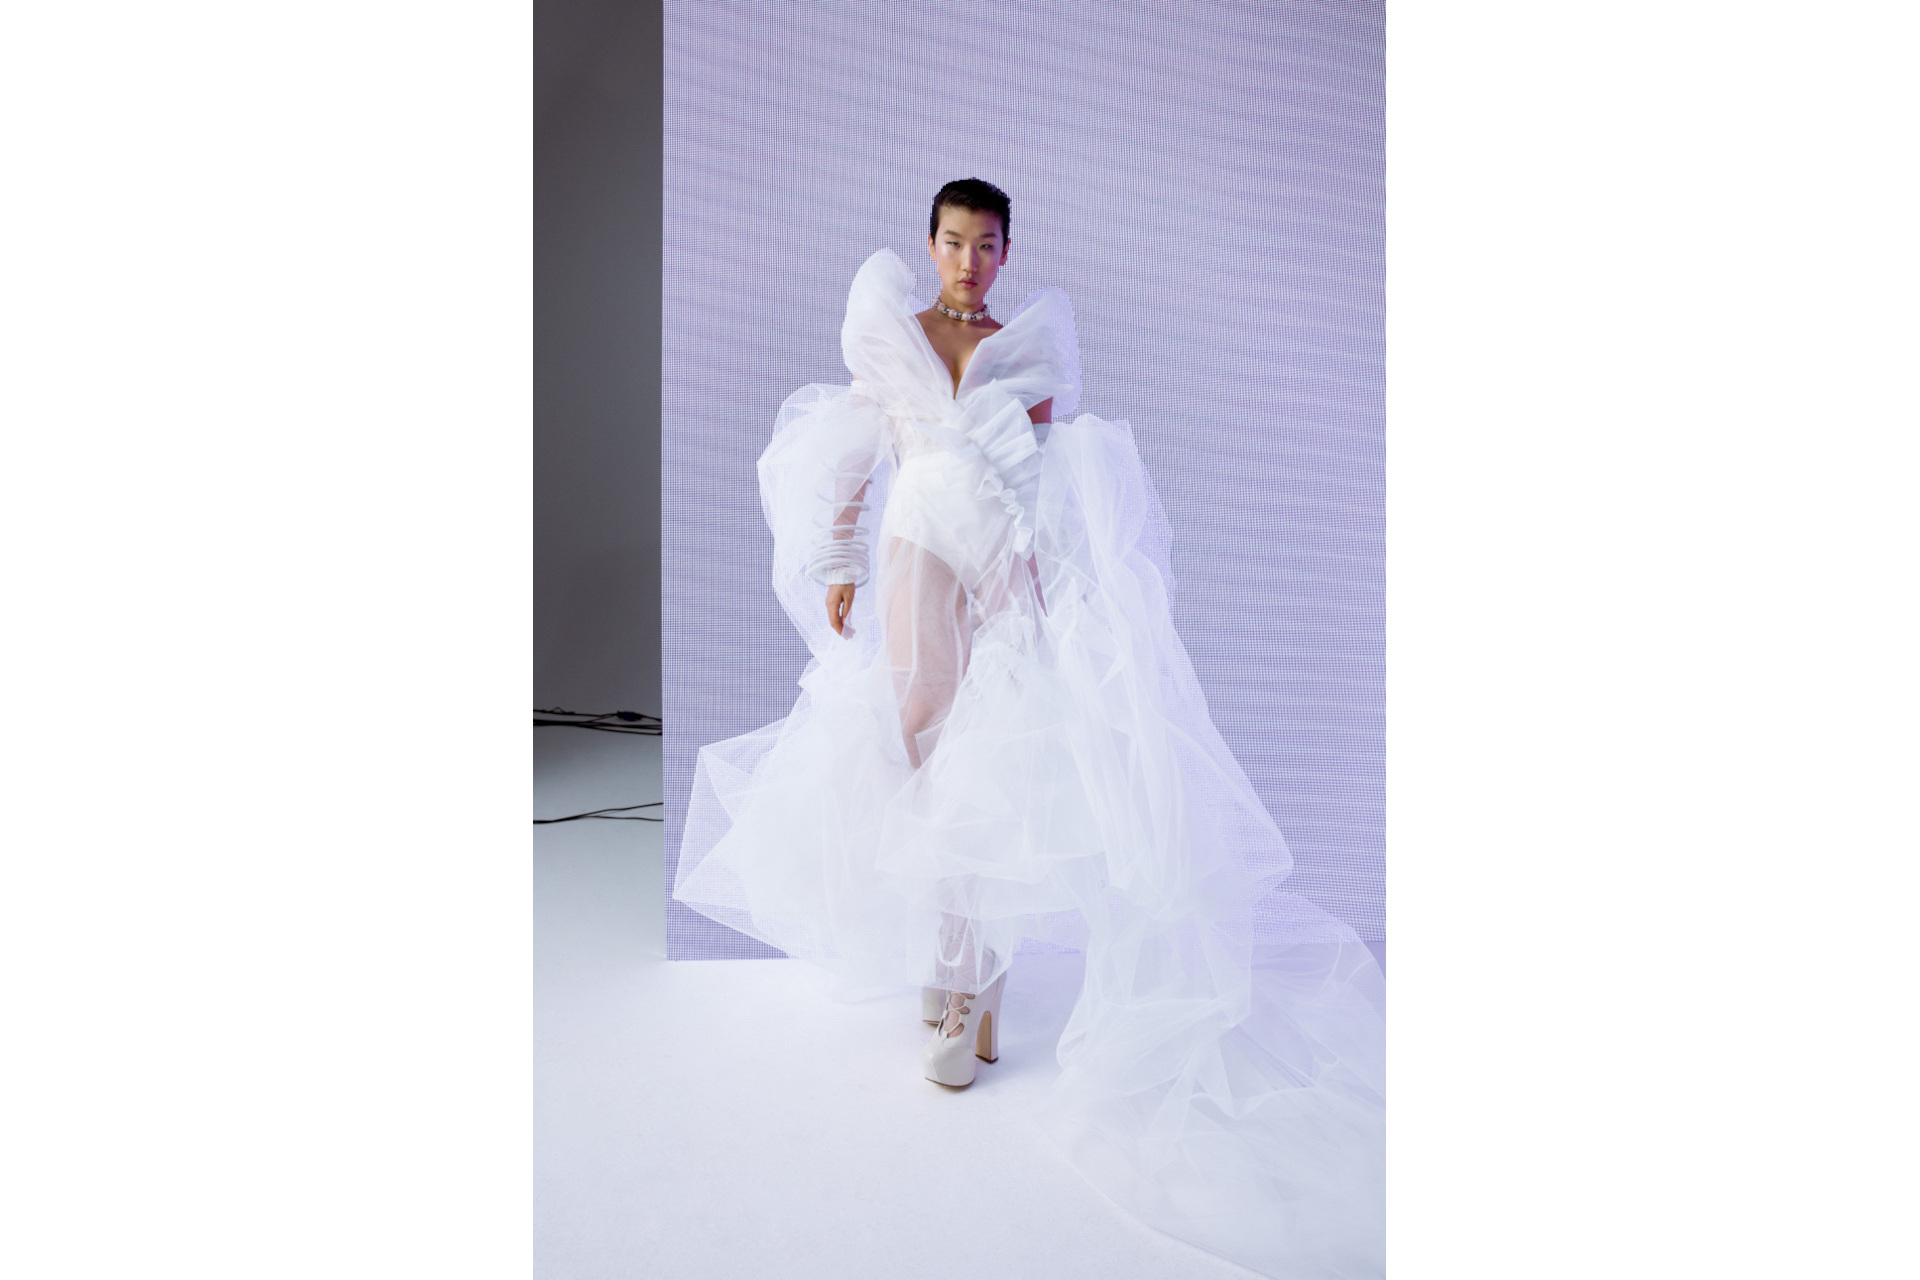 Vivienne Westwood Debuts New Bridal Styles With Sustainable Option – WWD